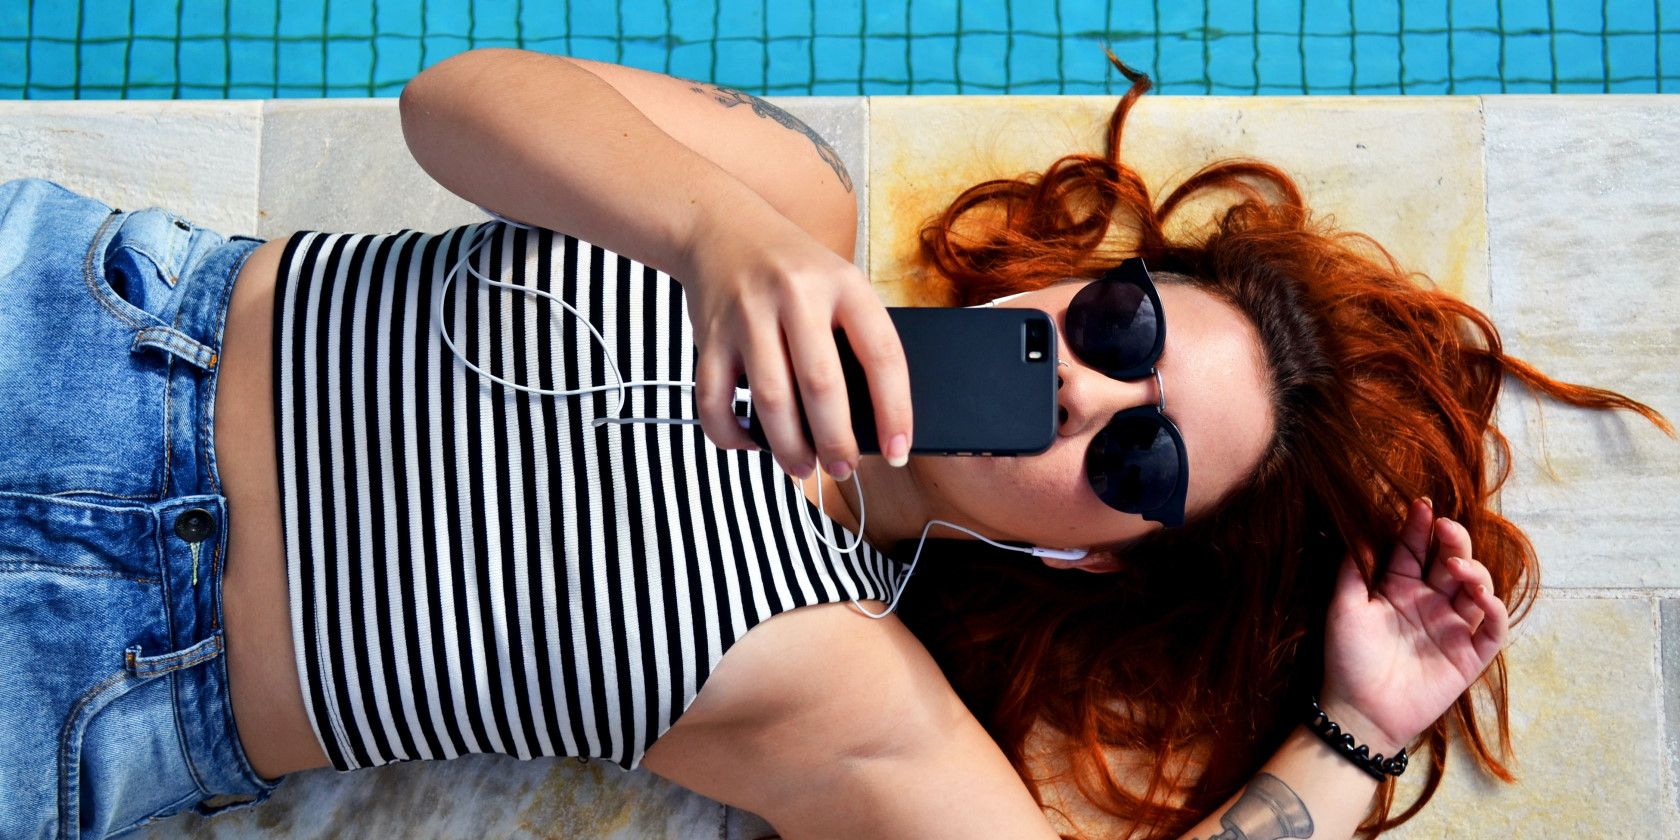 Woman lying down next to pool using smartphone